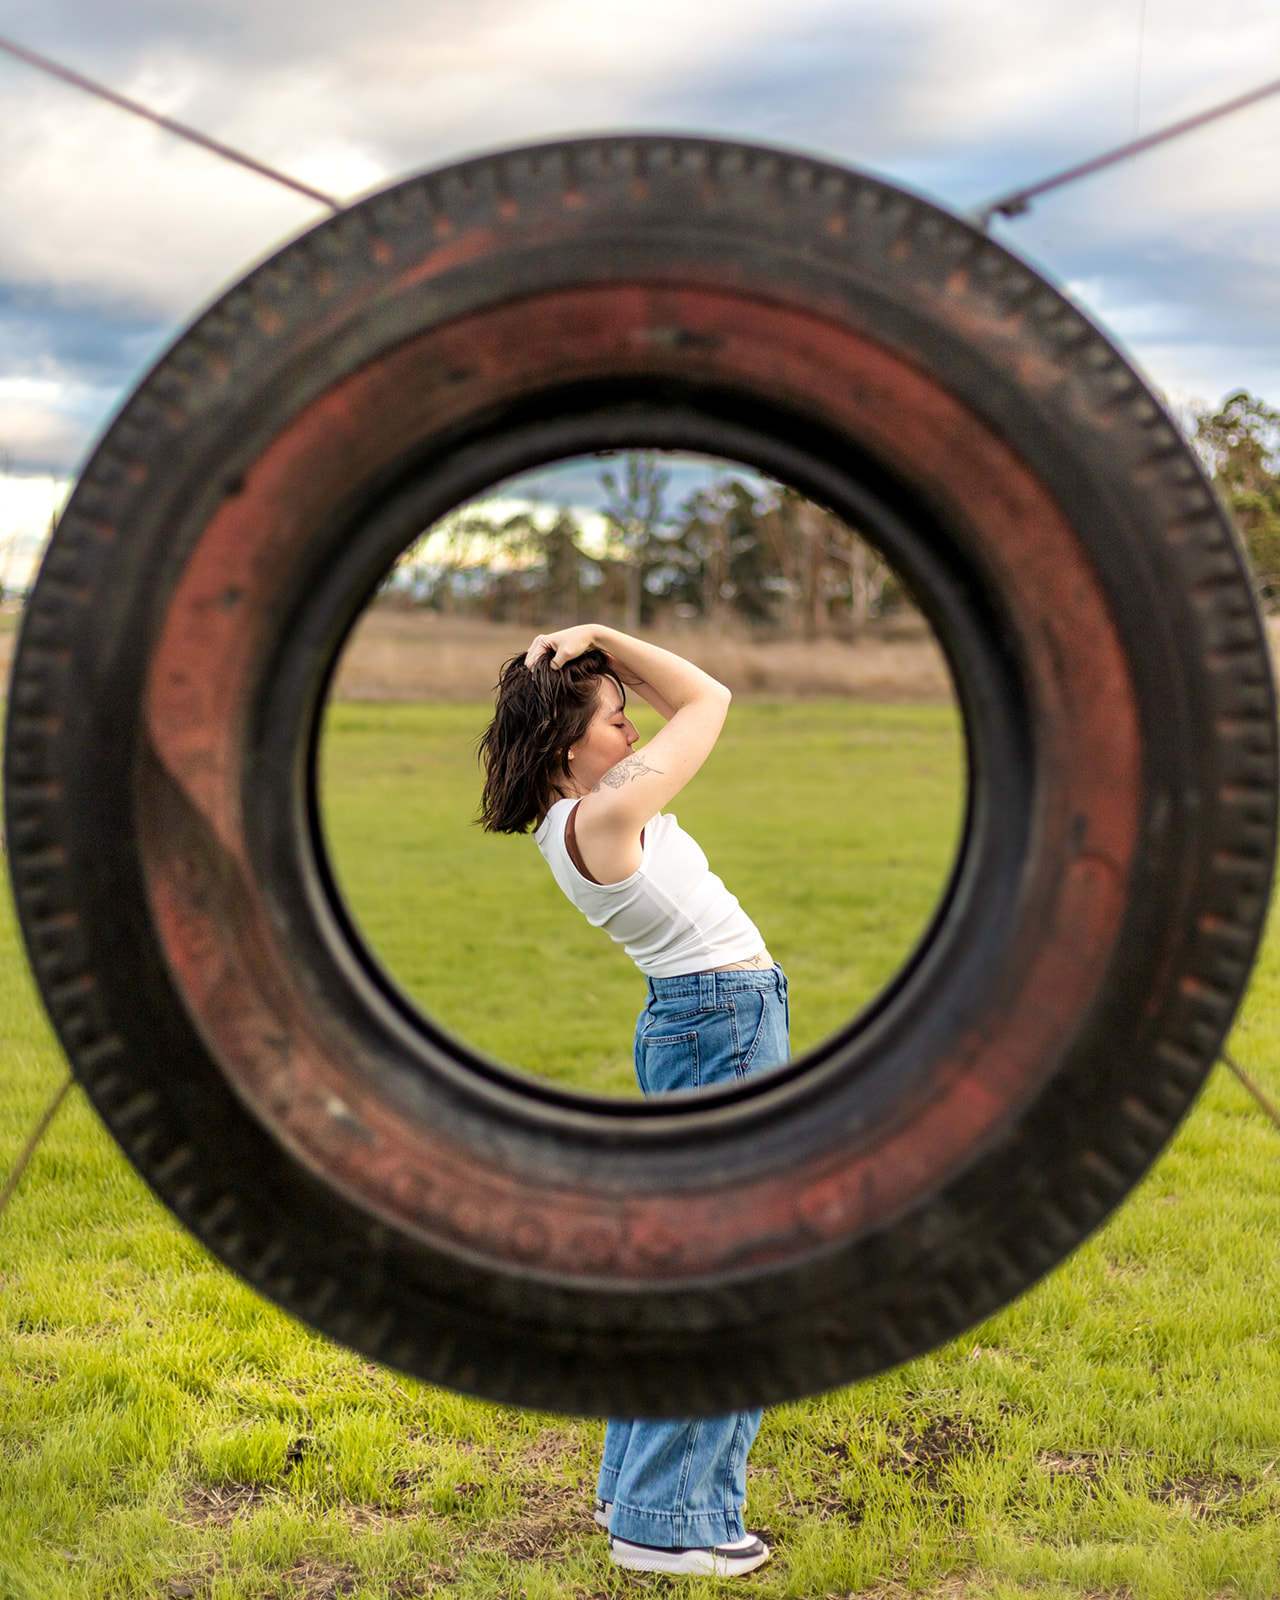 nonbinary person framed by old tire